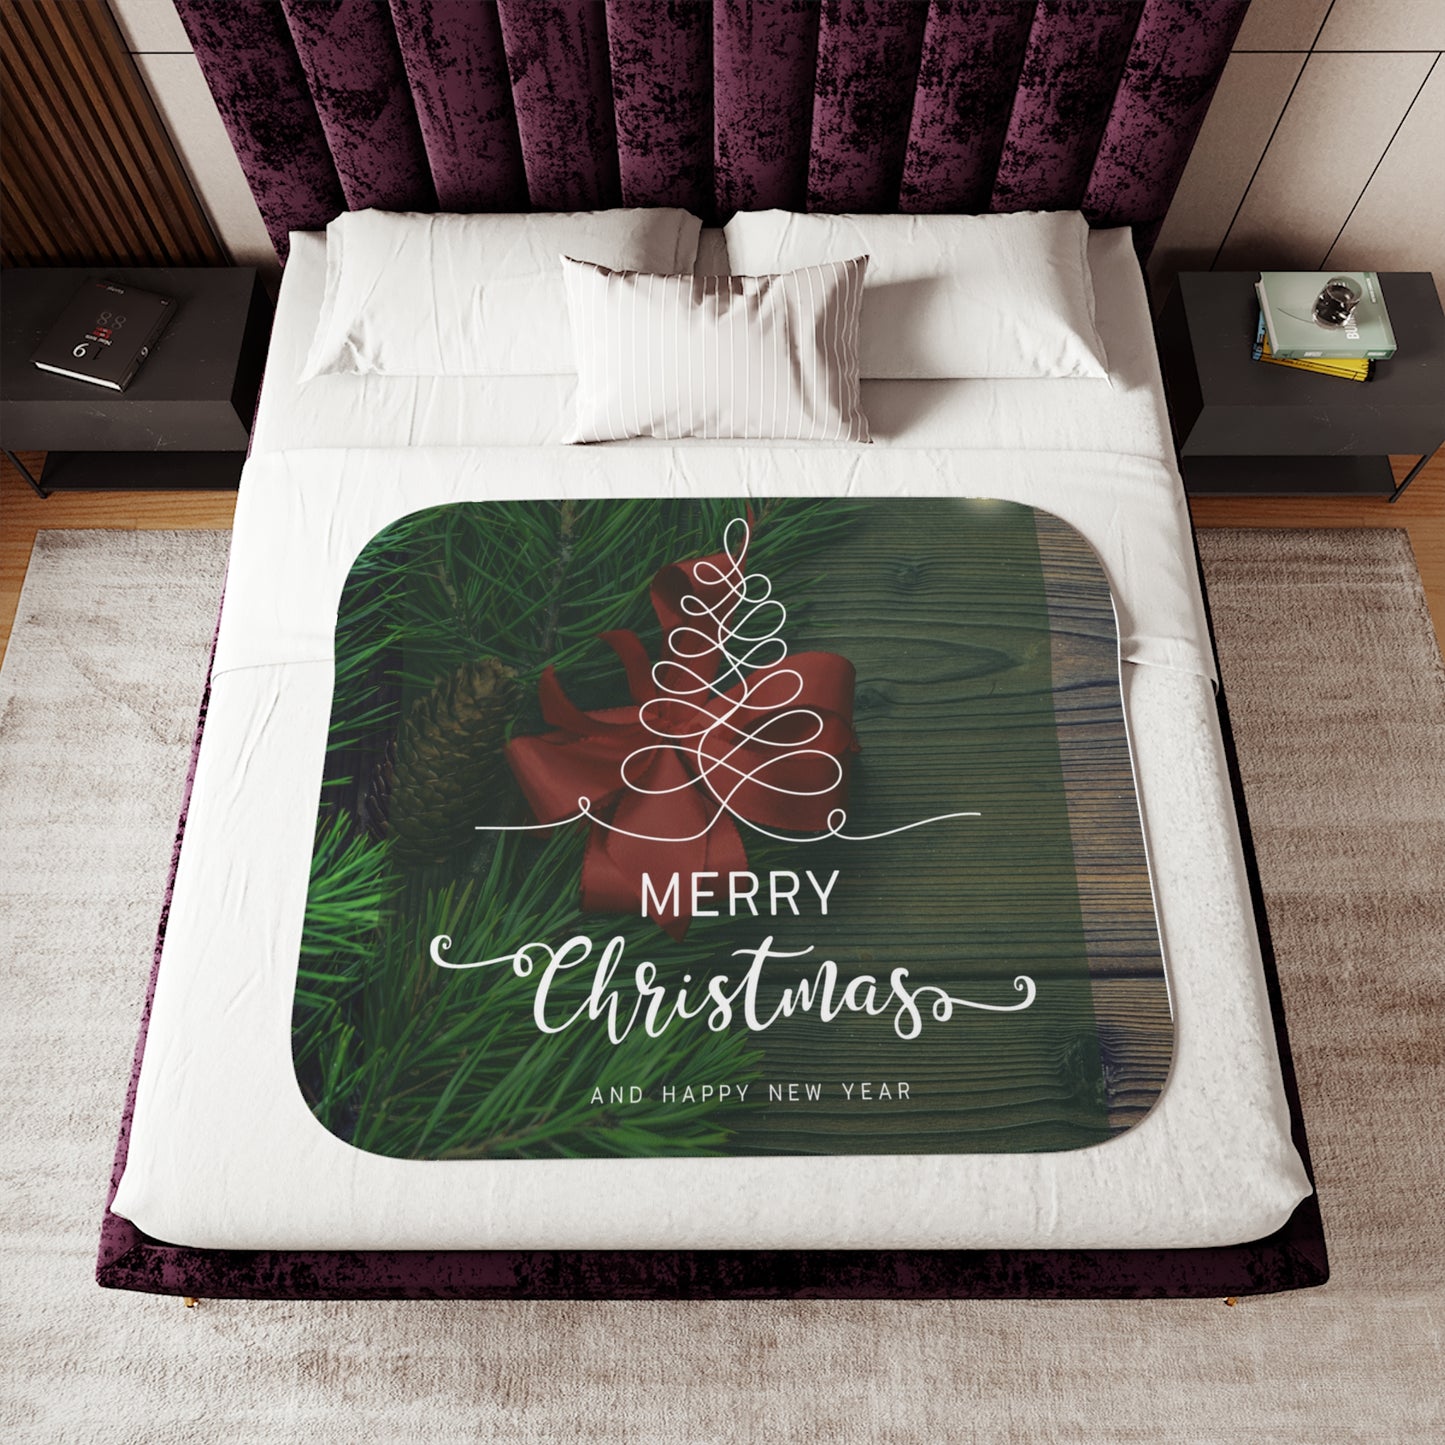 Merry Christmas and Happy New Year Printed Sherpa Blanket, Green